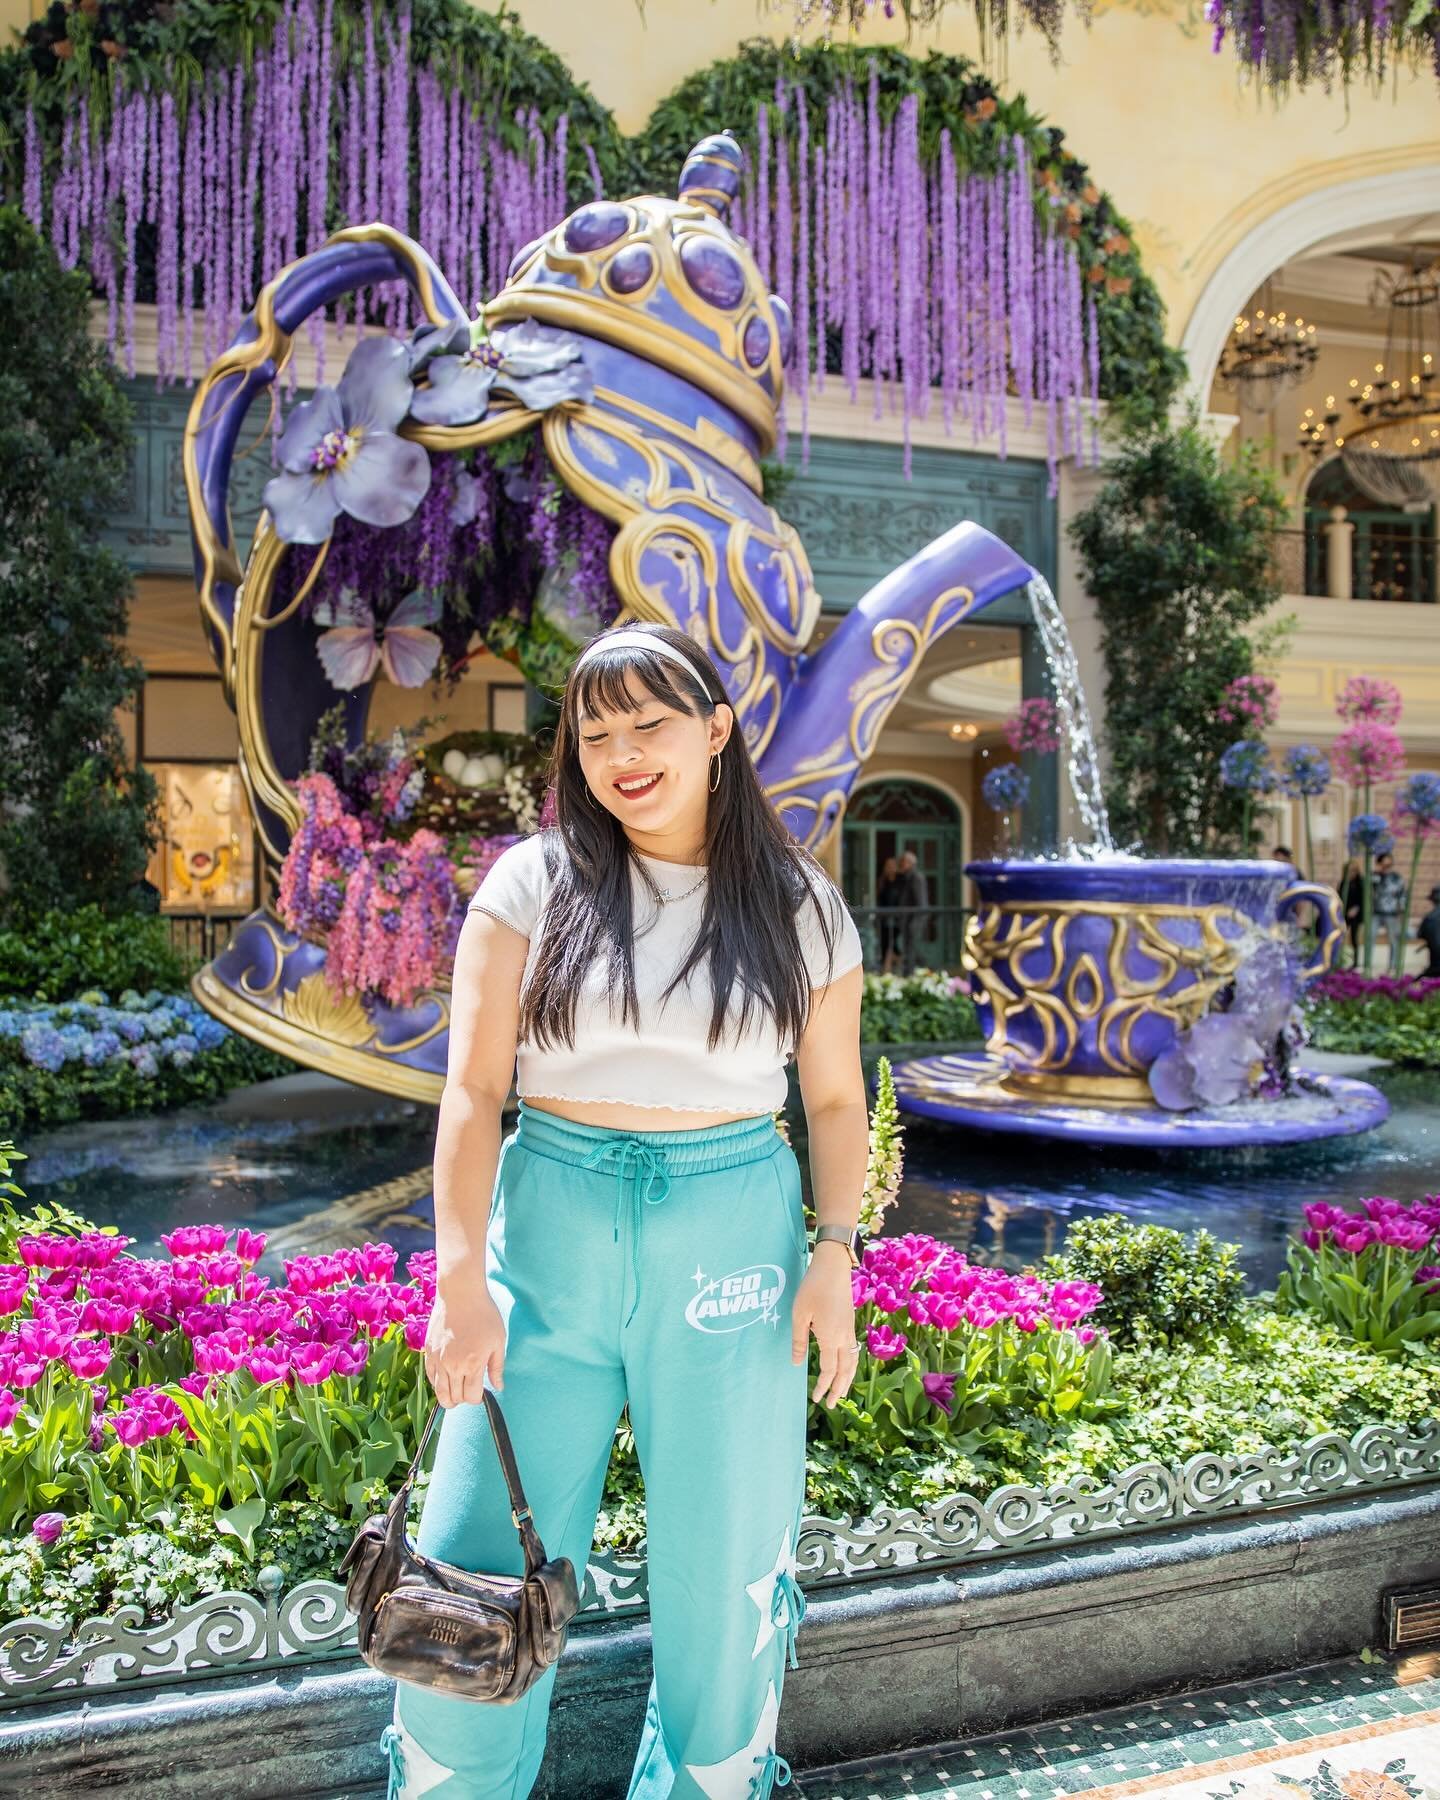 at tea time, everybody agrees 🫖

share this with a fellow travel buddy and save this post for your ultimate guide to everything you need to know about @bellagio&rsquo;s conservatory and botanical gardens:

📍 3600 s las vegas blvd, las vegas, nv 891